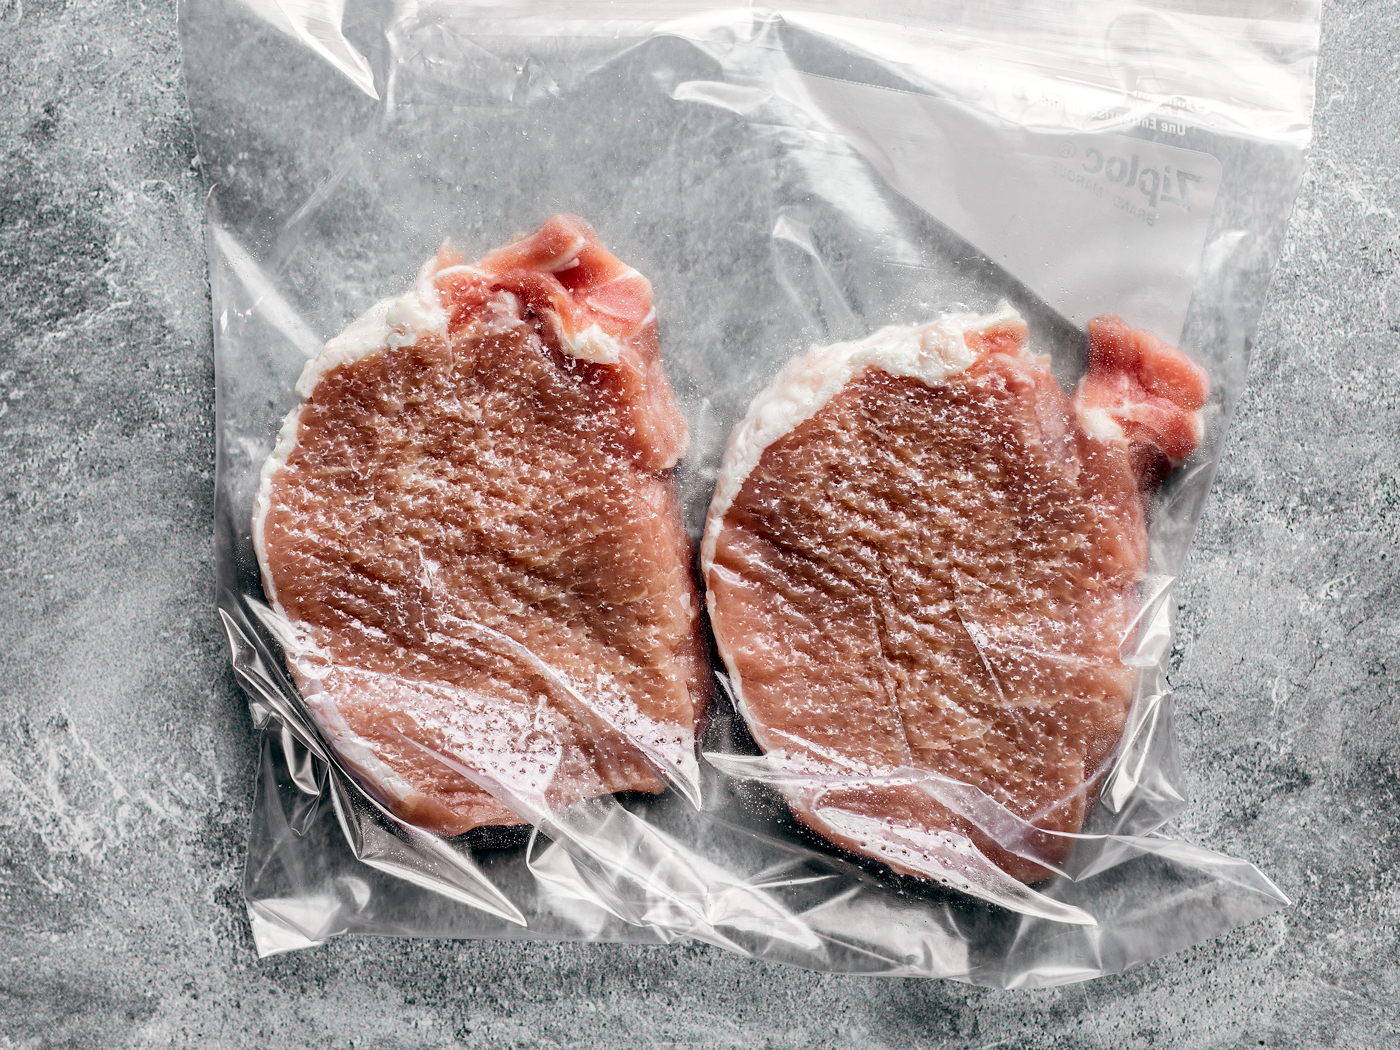 Two pork chops in a freezer bag that have been tenderized.